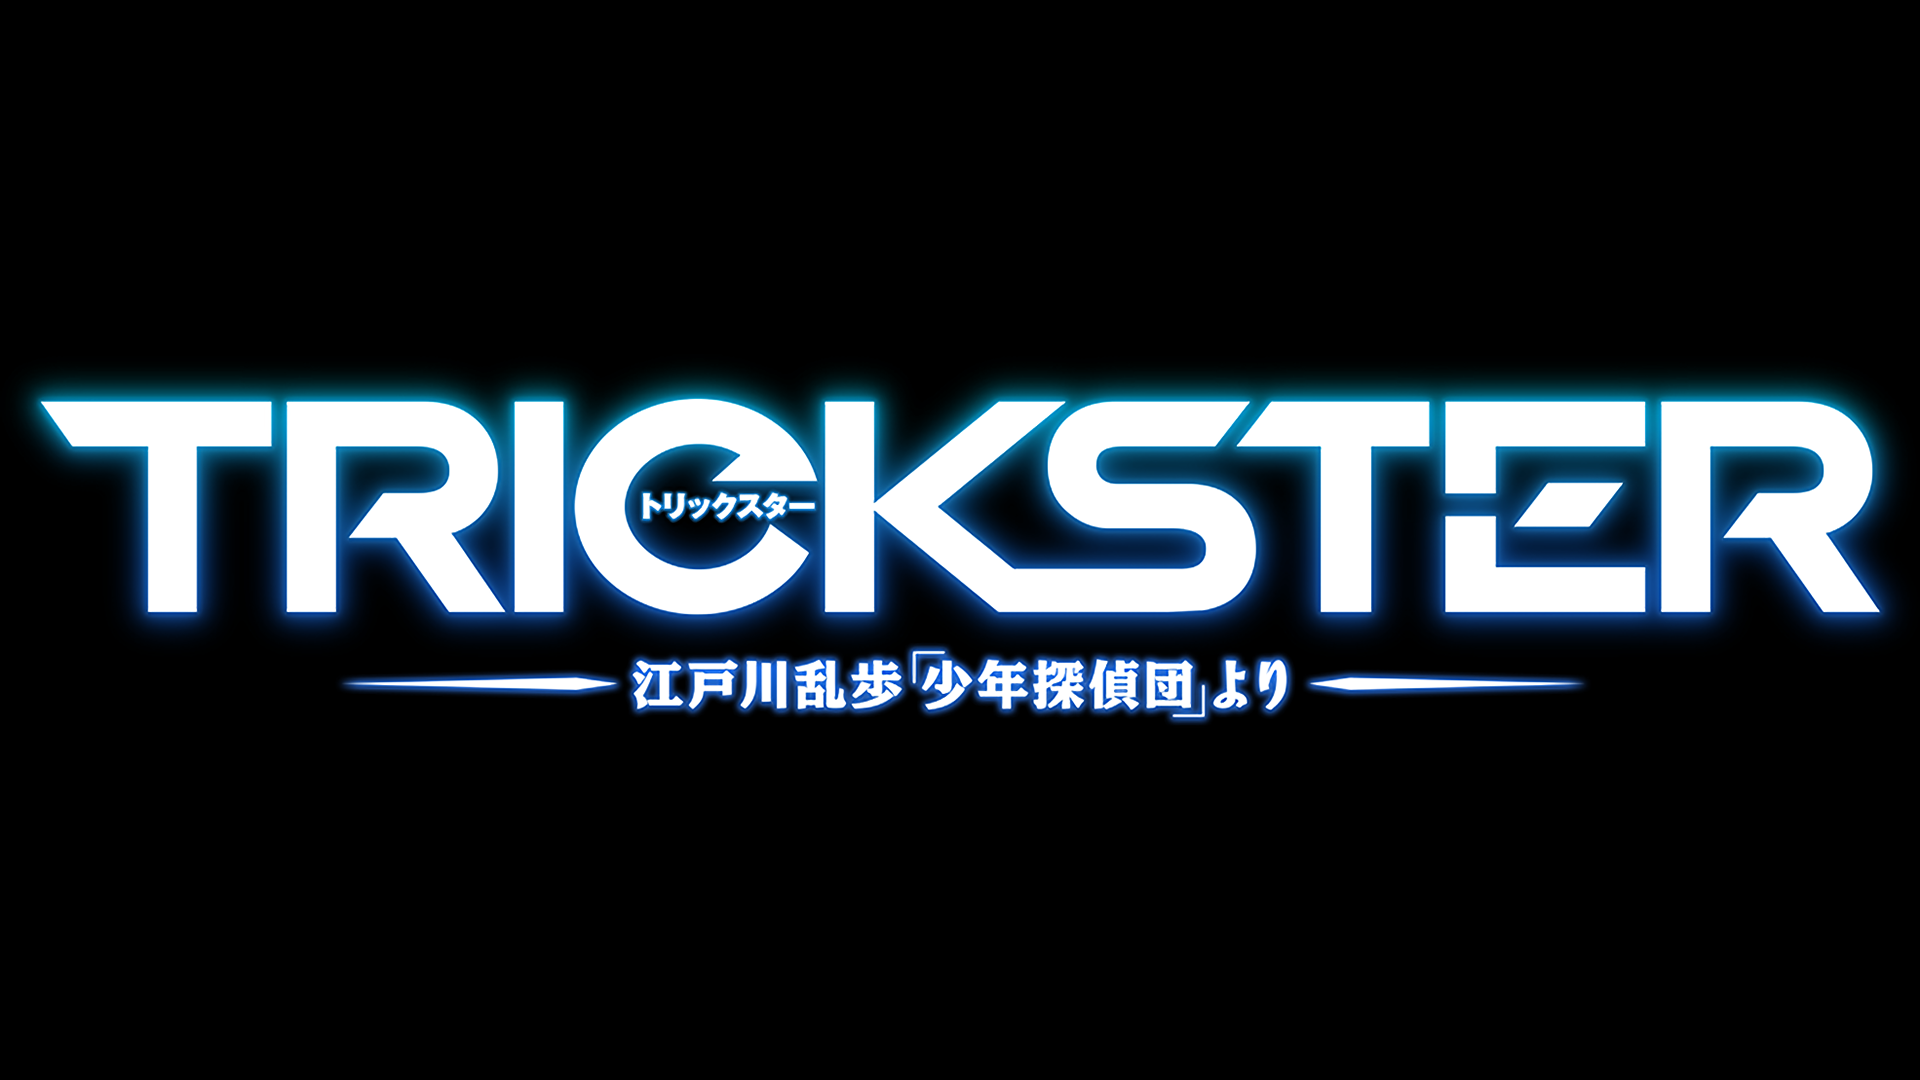 Download Trickster wallpapers for mobile phone free Trickster HD  pictures